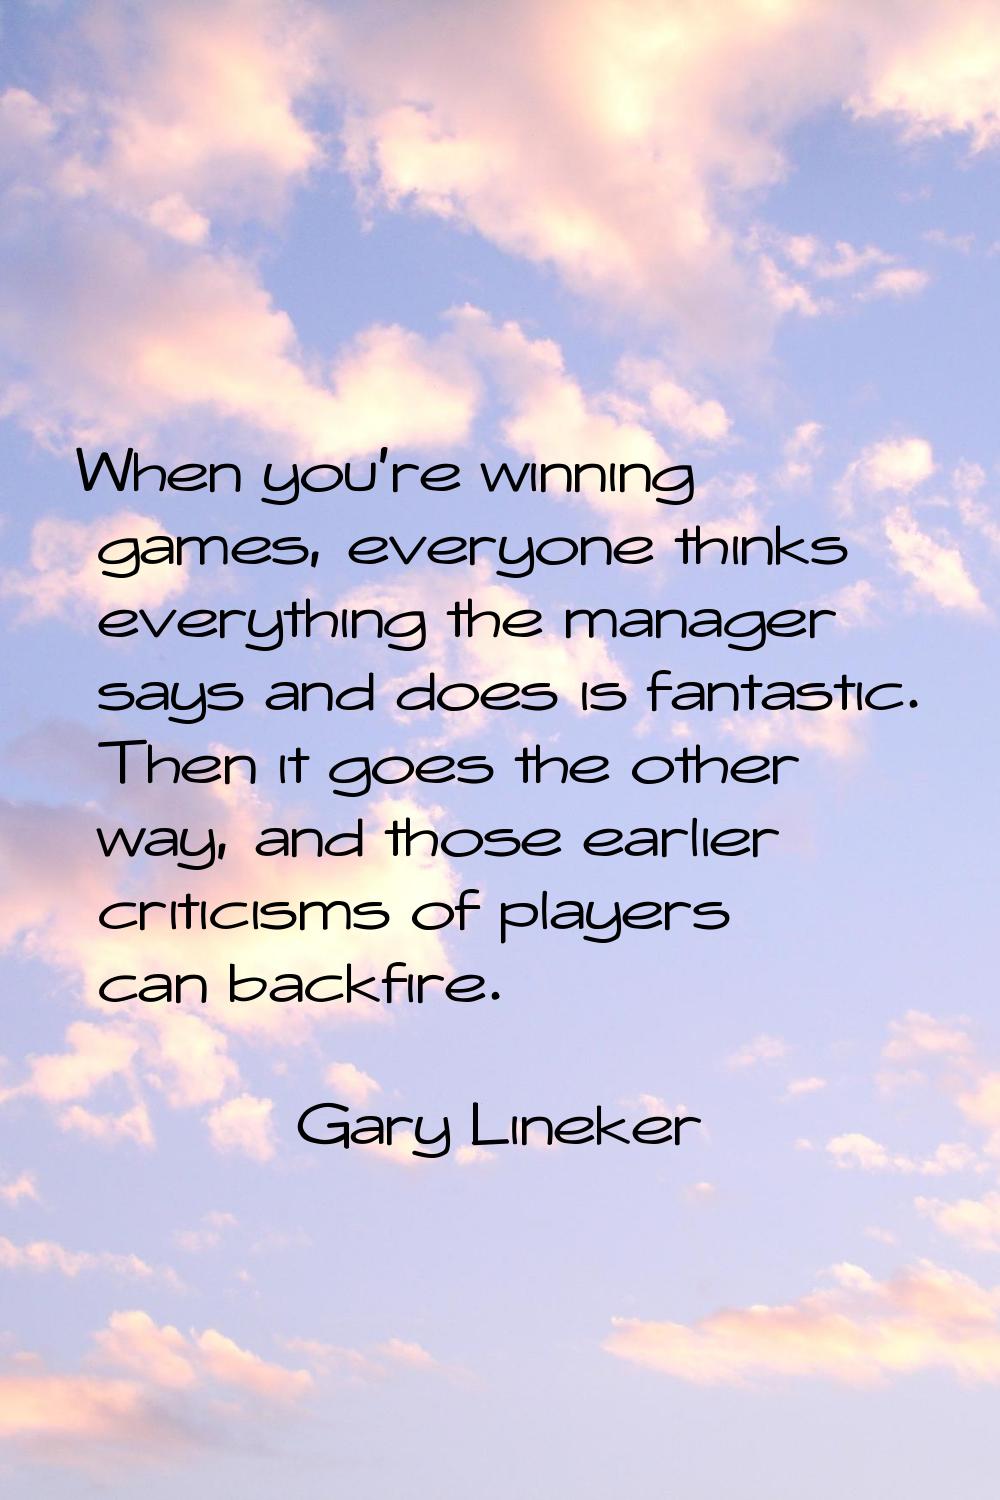 When you're winning games, everyone thinks everything the manager says and does is fantastic. Then 